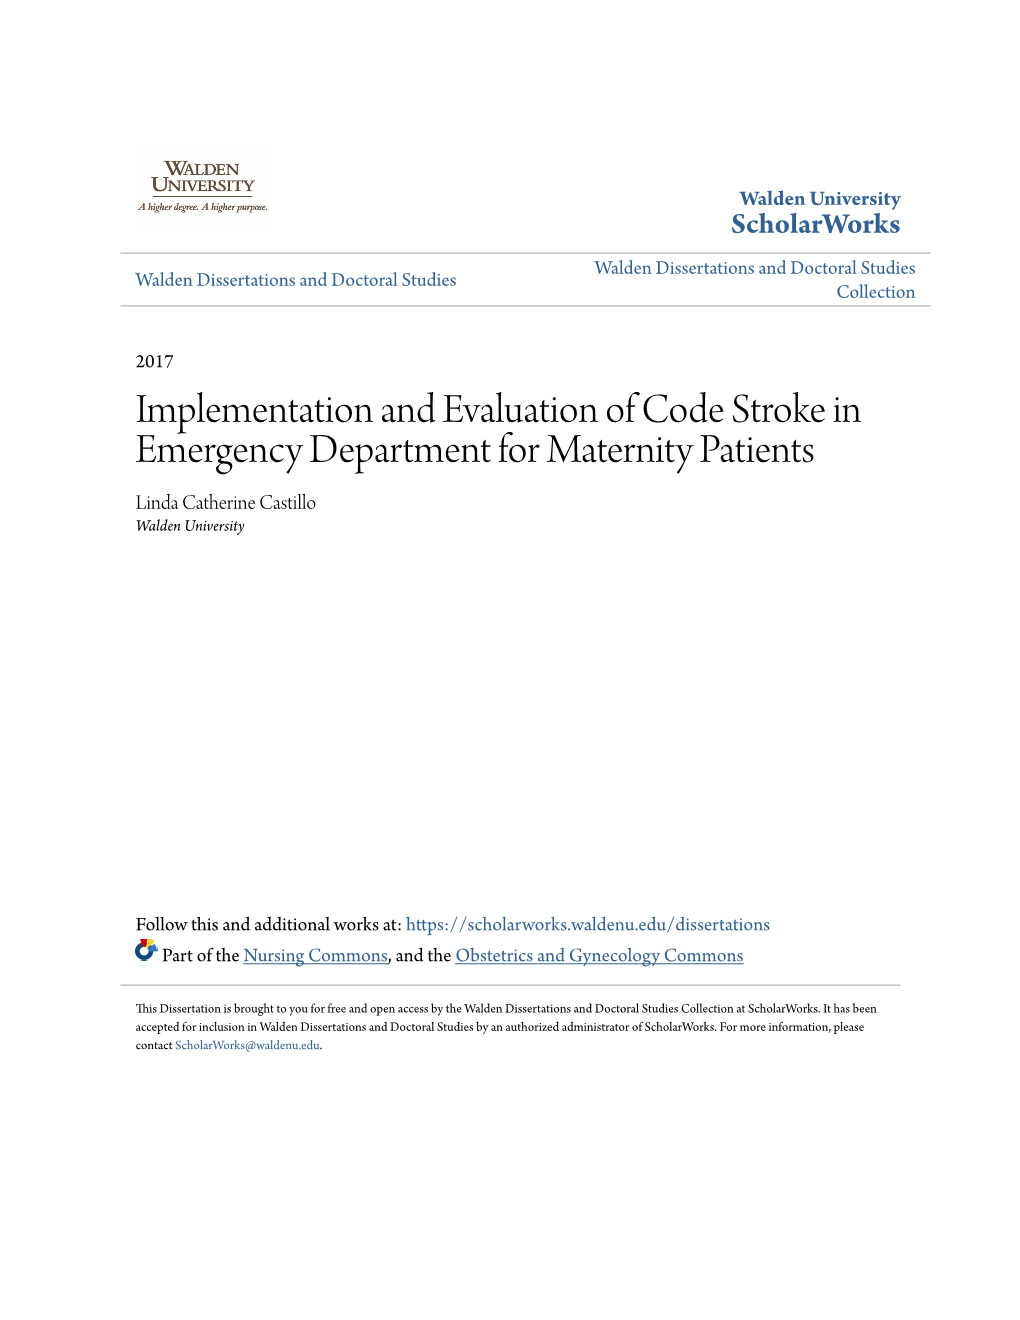 Implementation and Evaluation of Code Stroke in Emergency Department for Maternity Patients Linda Catherine Castillo Walden University